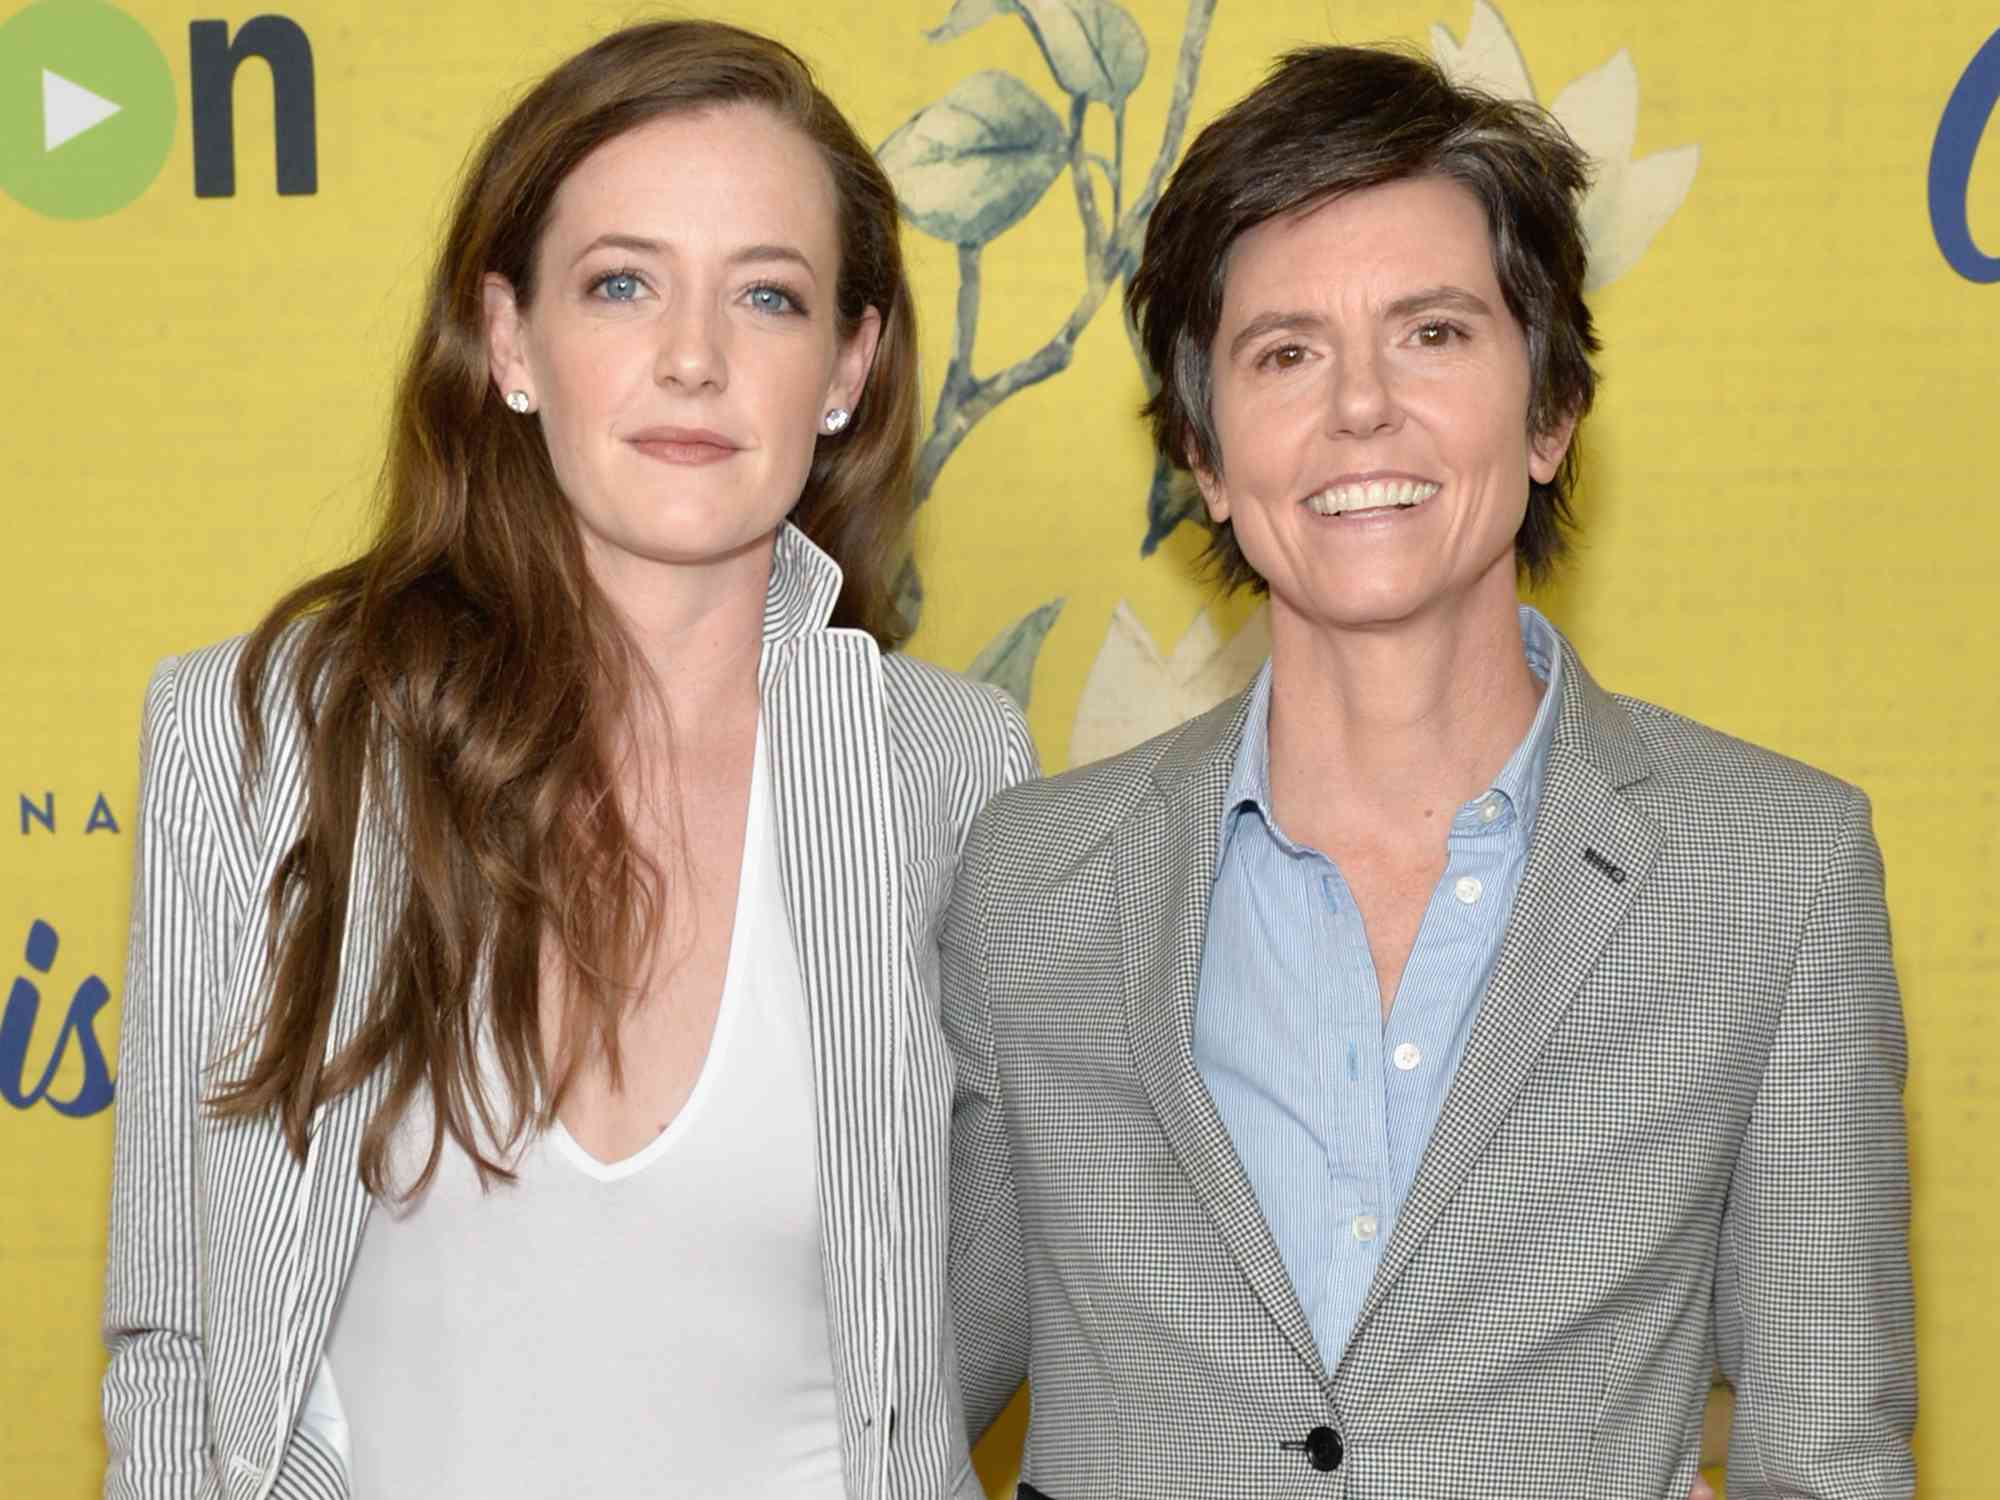 Stephanie Allynne and Tig Notaro attend the premiere of Amazon Instant Video's 'One Mississippi' on August 30, 2016 in West Hollywood, California. 